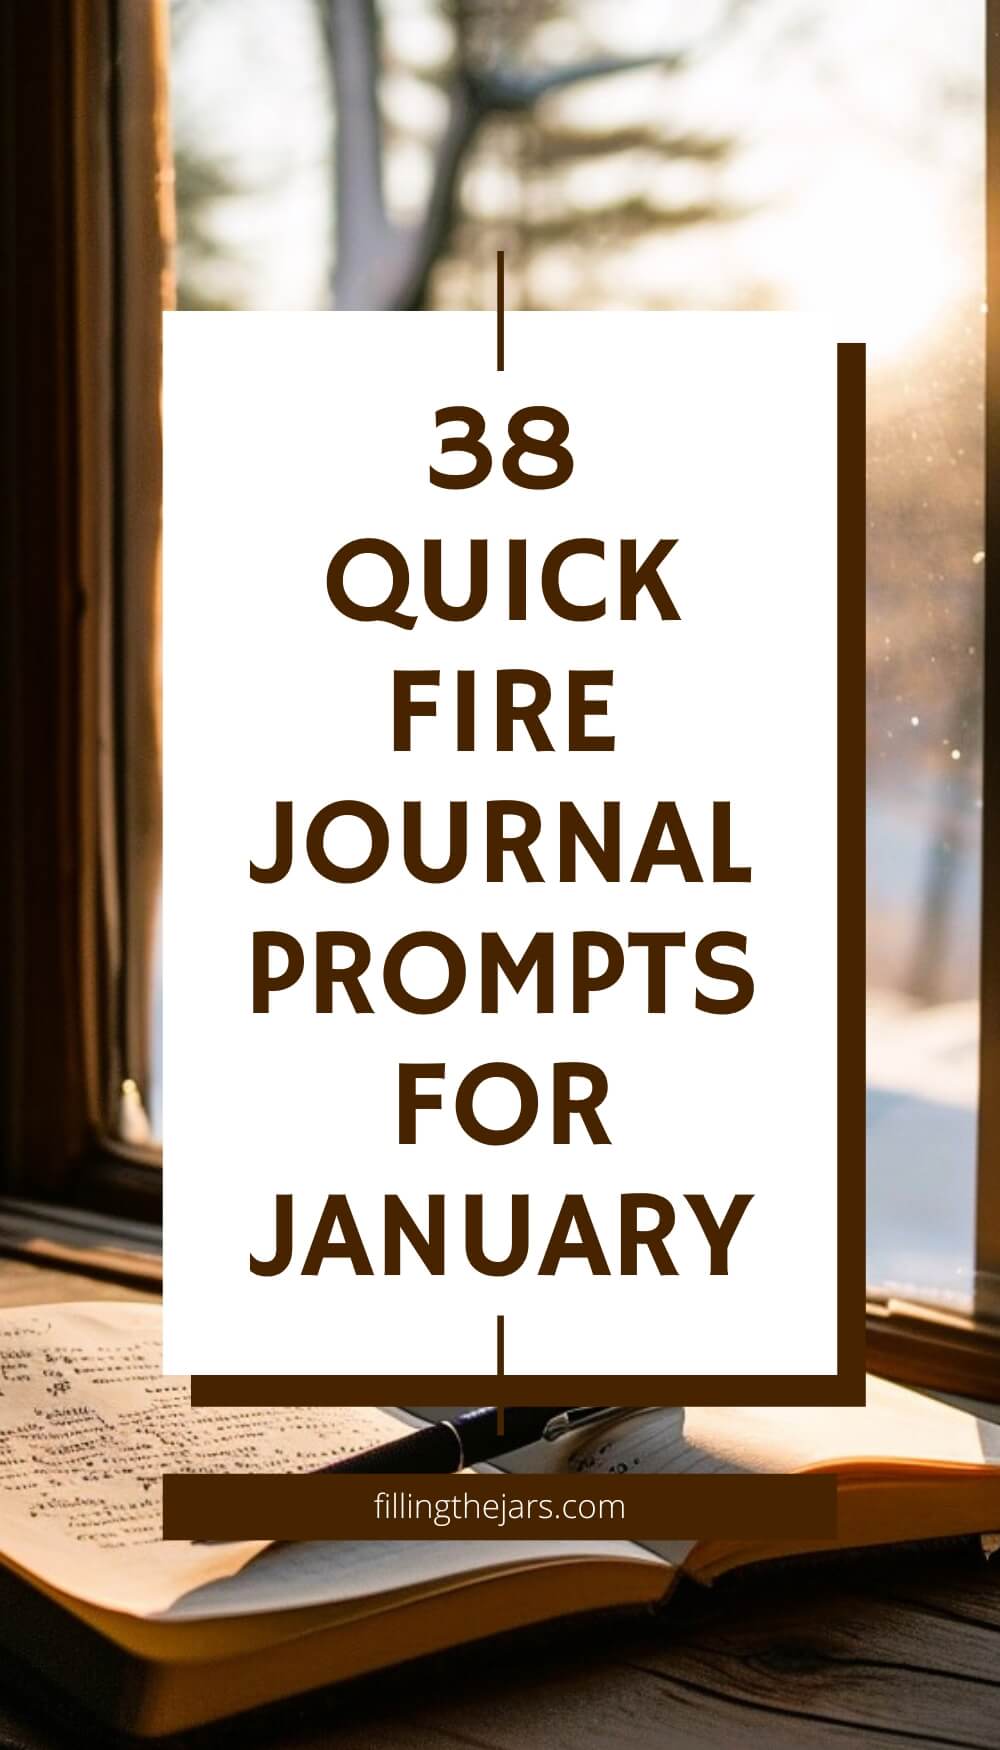 Pinterest image with text '38 quick fire journal prompts for January' on white square over background of open journal near sunny window on a snowy day.